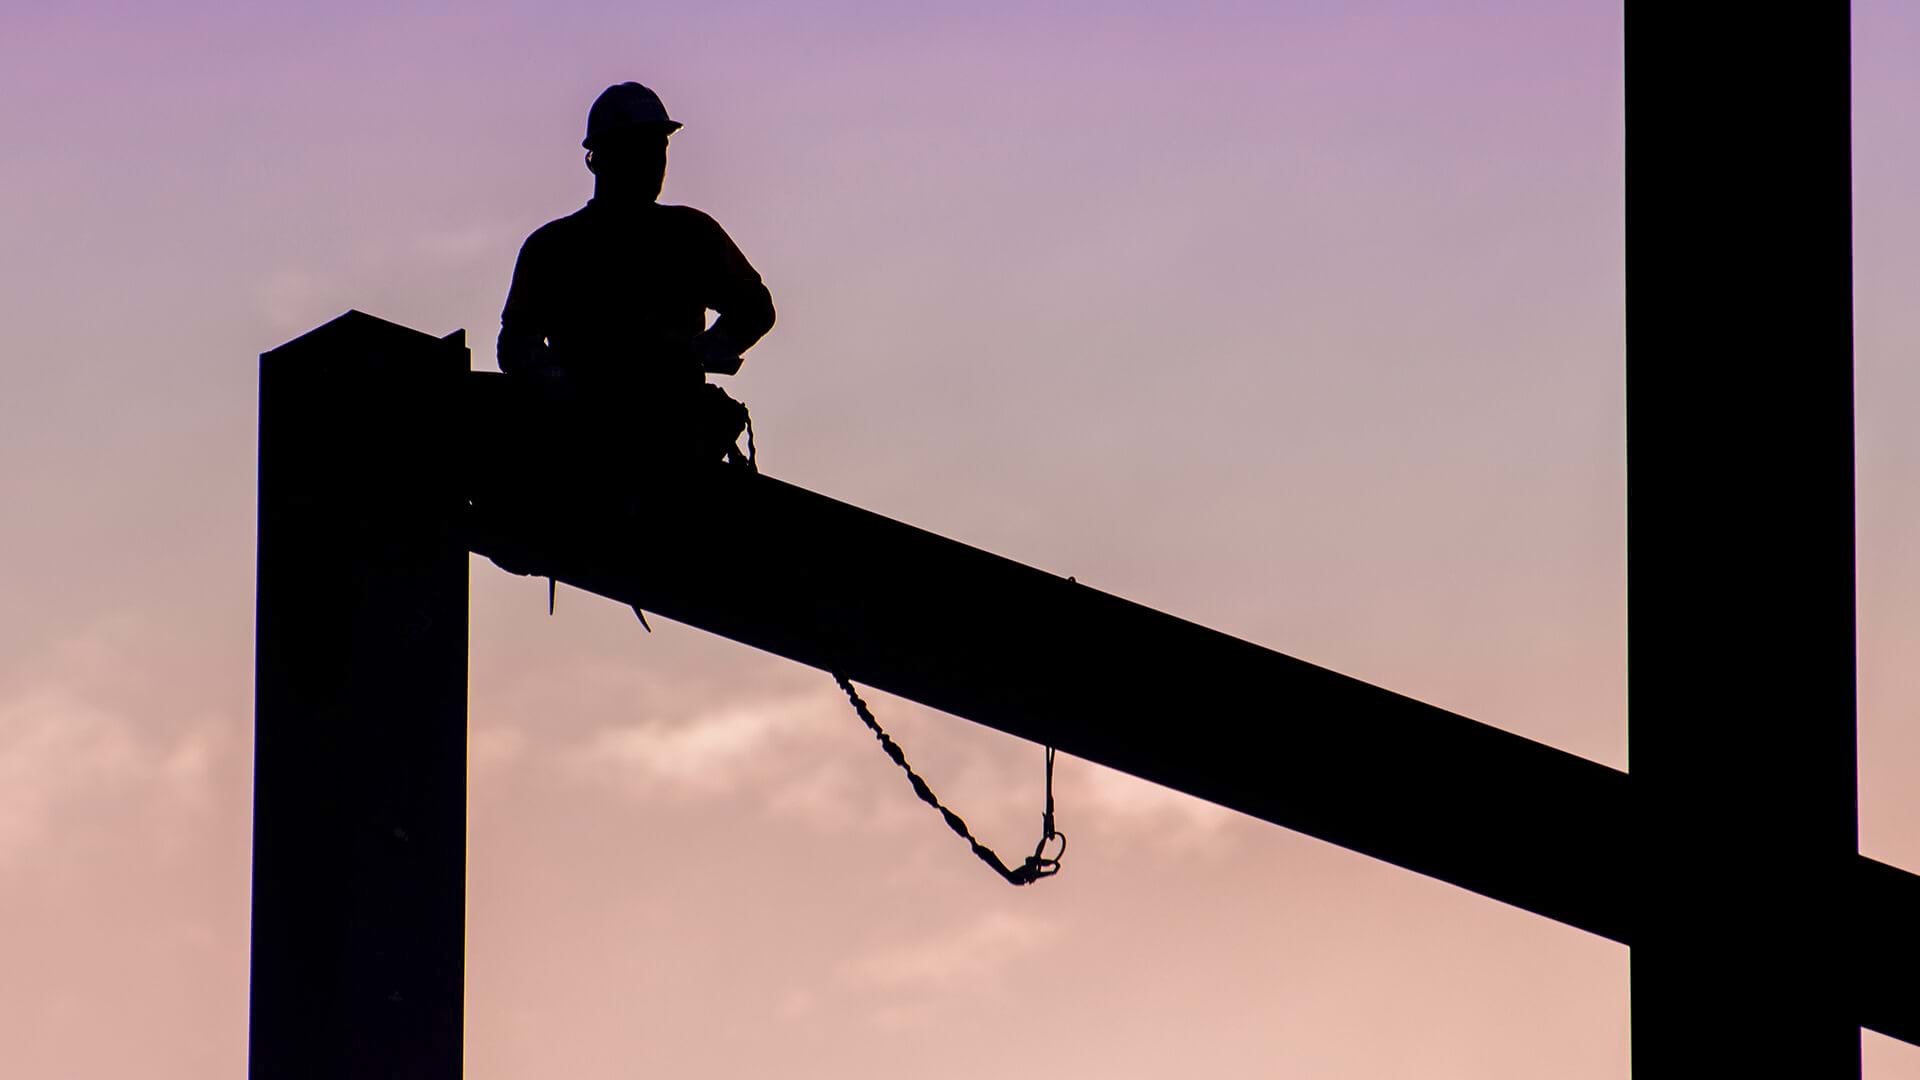 A worker in a high hat, sitting on a beam represents construction firms